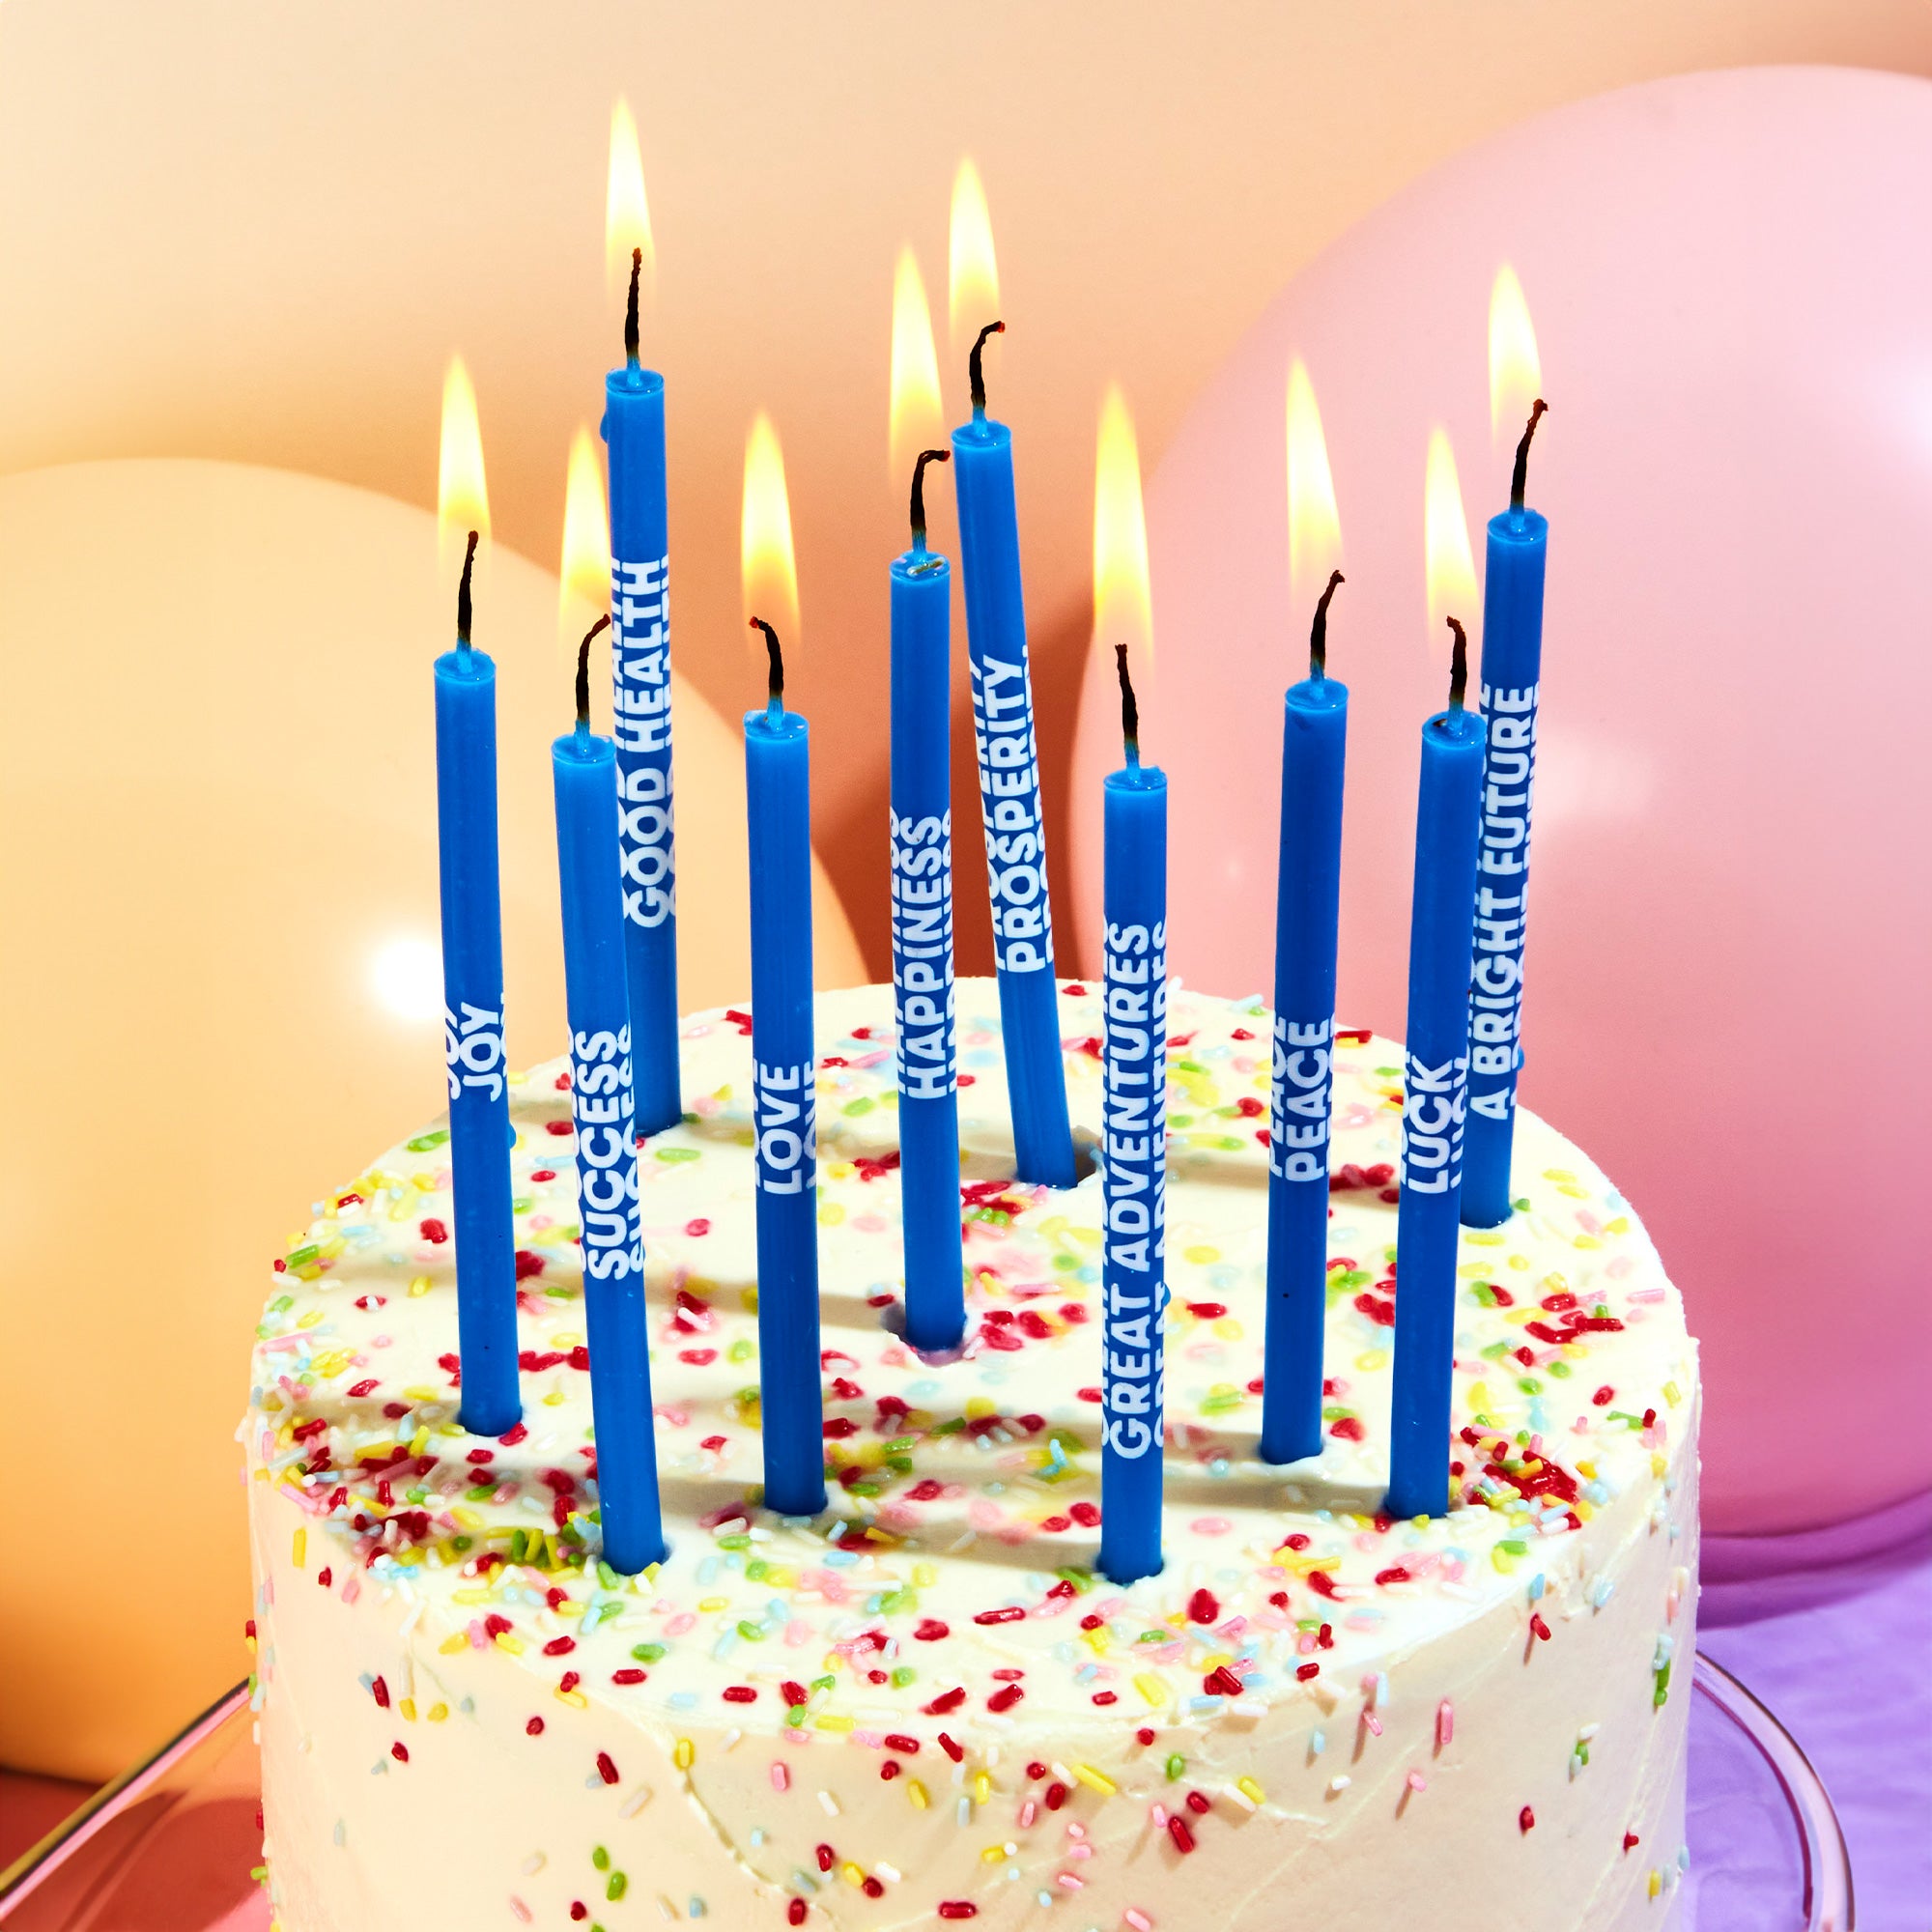 Wishing You: Birthday Candles - Blue